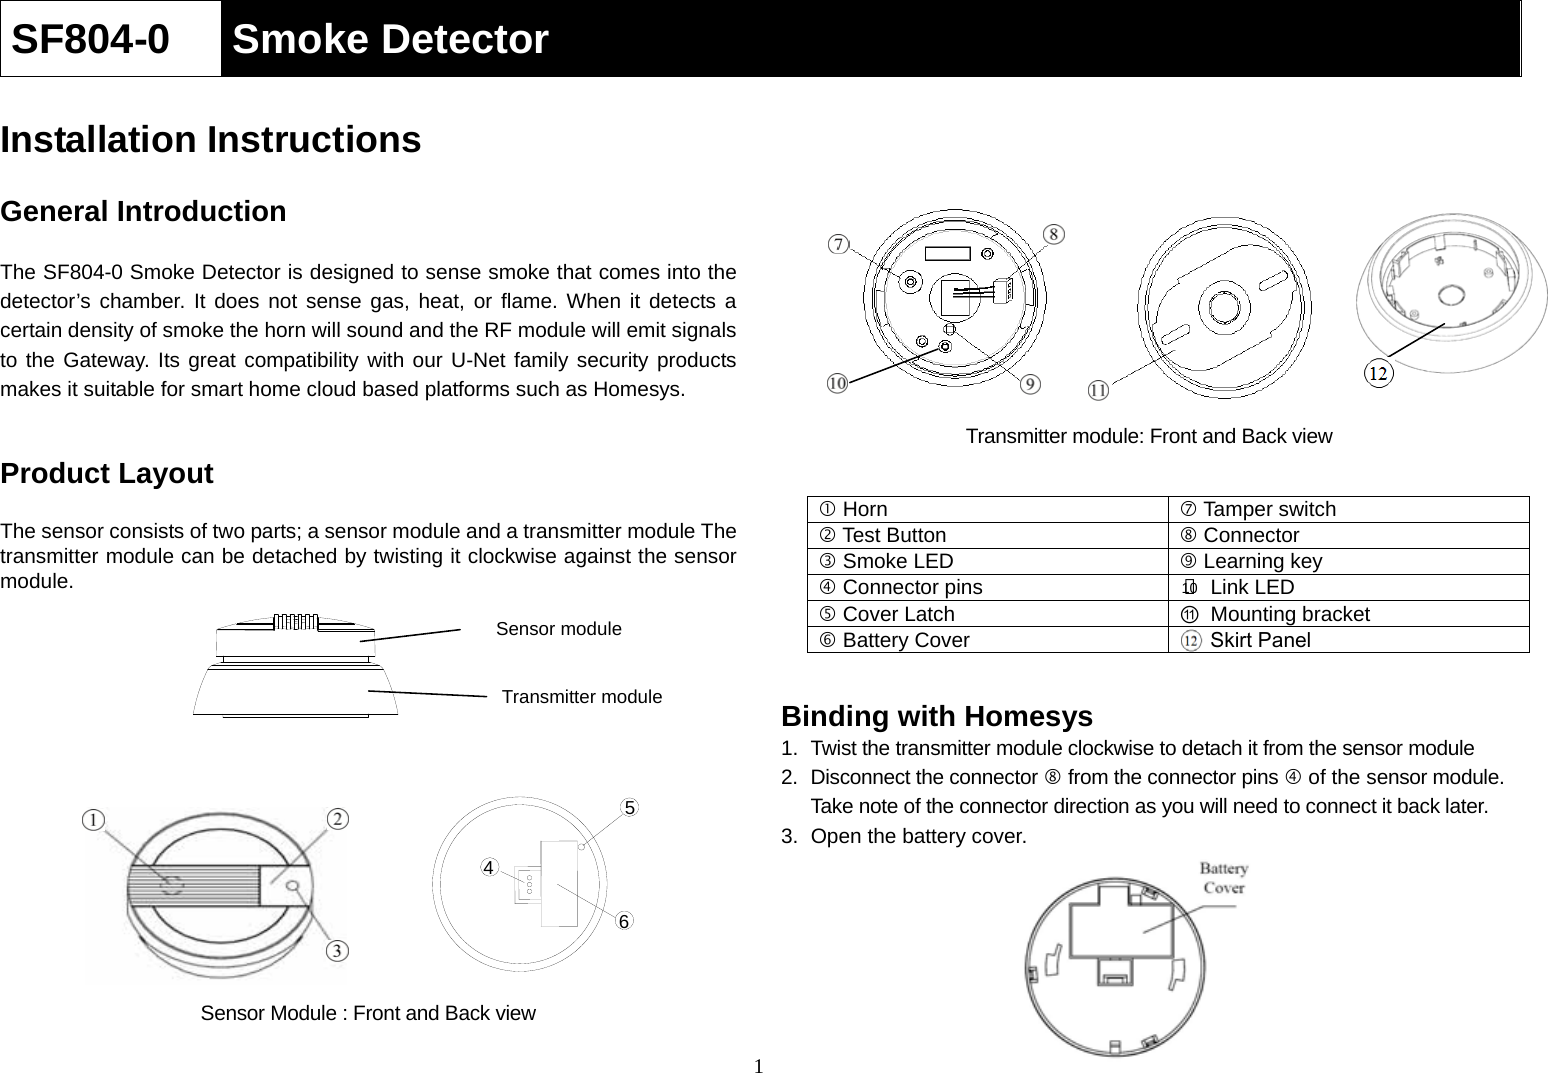  1SF804-0  Smoke Detector  Installation Instructions  General Introduction  The SF804-0 Smoke Detector is designed to sense smoke that comes into the detector’s chamber. It does not sense gas, heat, or flame. When it detects a certain density of smoke the horn will sound and the RF module will emit signals to the Gateway. Its great compatibility with our U-Net family security products makes it suitable for smart home cloud based platforms such as Homesys.     Product Layout  The sensor consists of two parts; a sensor module and a transmitter module The transmitter module can be detached by twisting it clockwise against the sensor module.                 Sensor Module : Front and Back view           Transmitter module: Front and Back view    Binding with Homesys 1.  Twist the transmitter module clockwise to detach it from the sensor module 2. Disconnect the connector  from the connector pins  of the sensor module. Take note of the connector direction as you will need to connect it back later. 3.  Open the battery cover.         Horn   Tamper switch  Test Button   Connector  Smoke LED   Learning key  Connector pins  ○10  Link LED  Cover Latch  ⑪Mounting bracket   Battery Cover   Skirt Panel 456Sensor module Transmitter module 